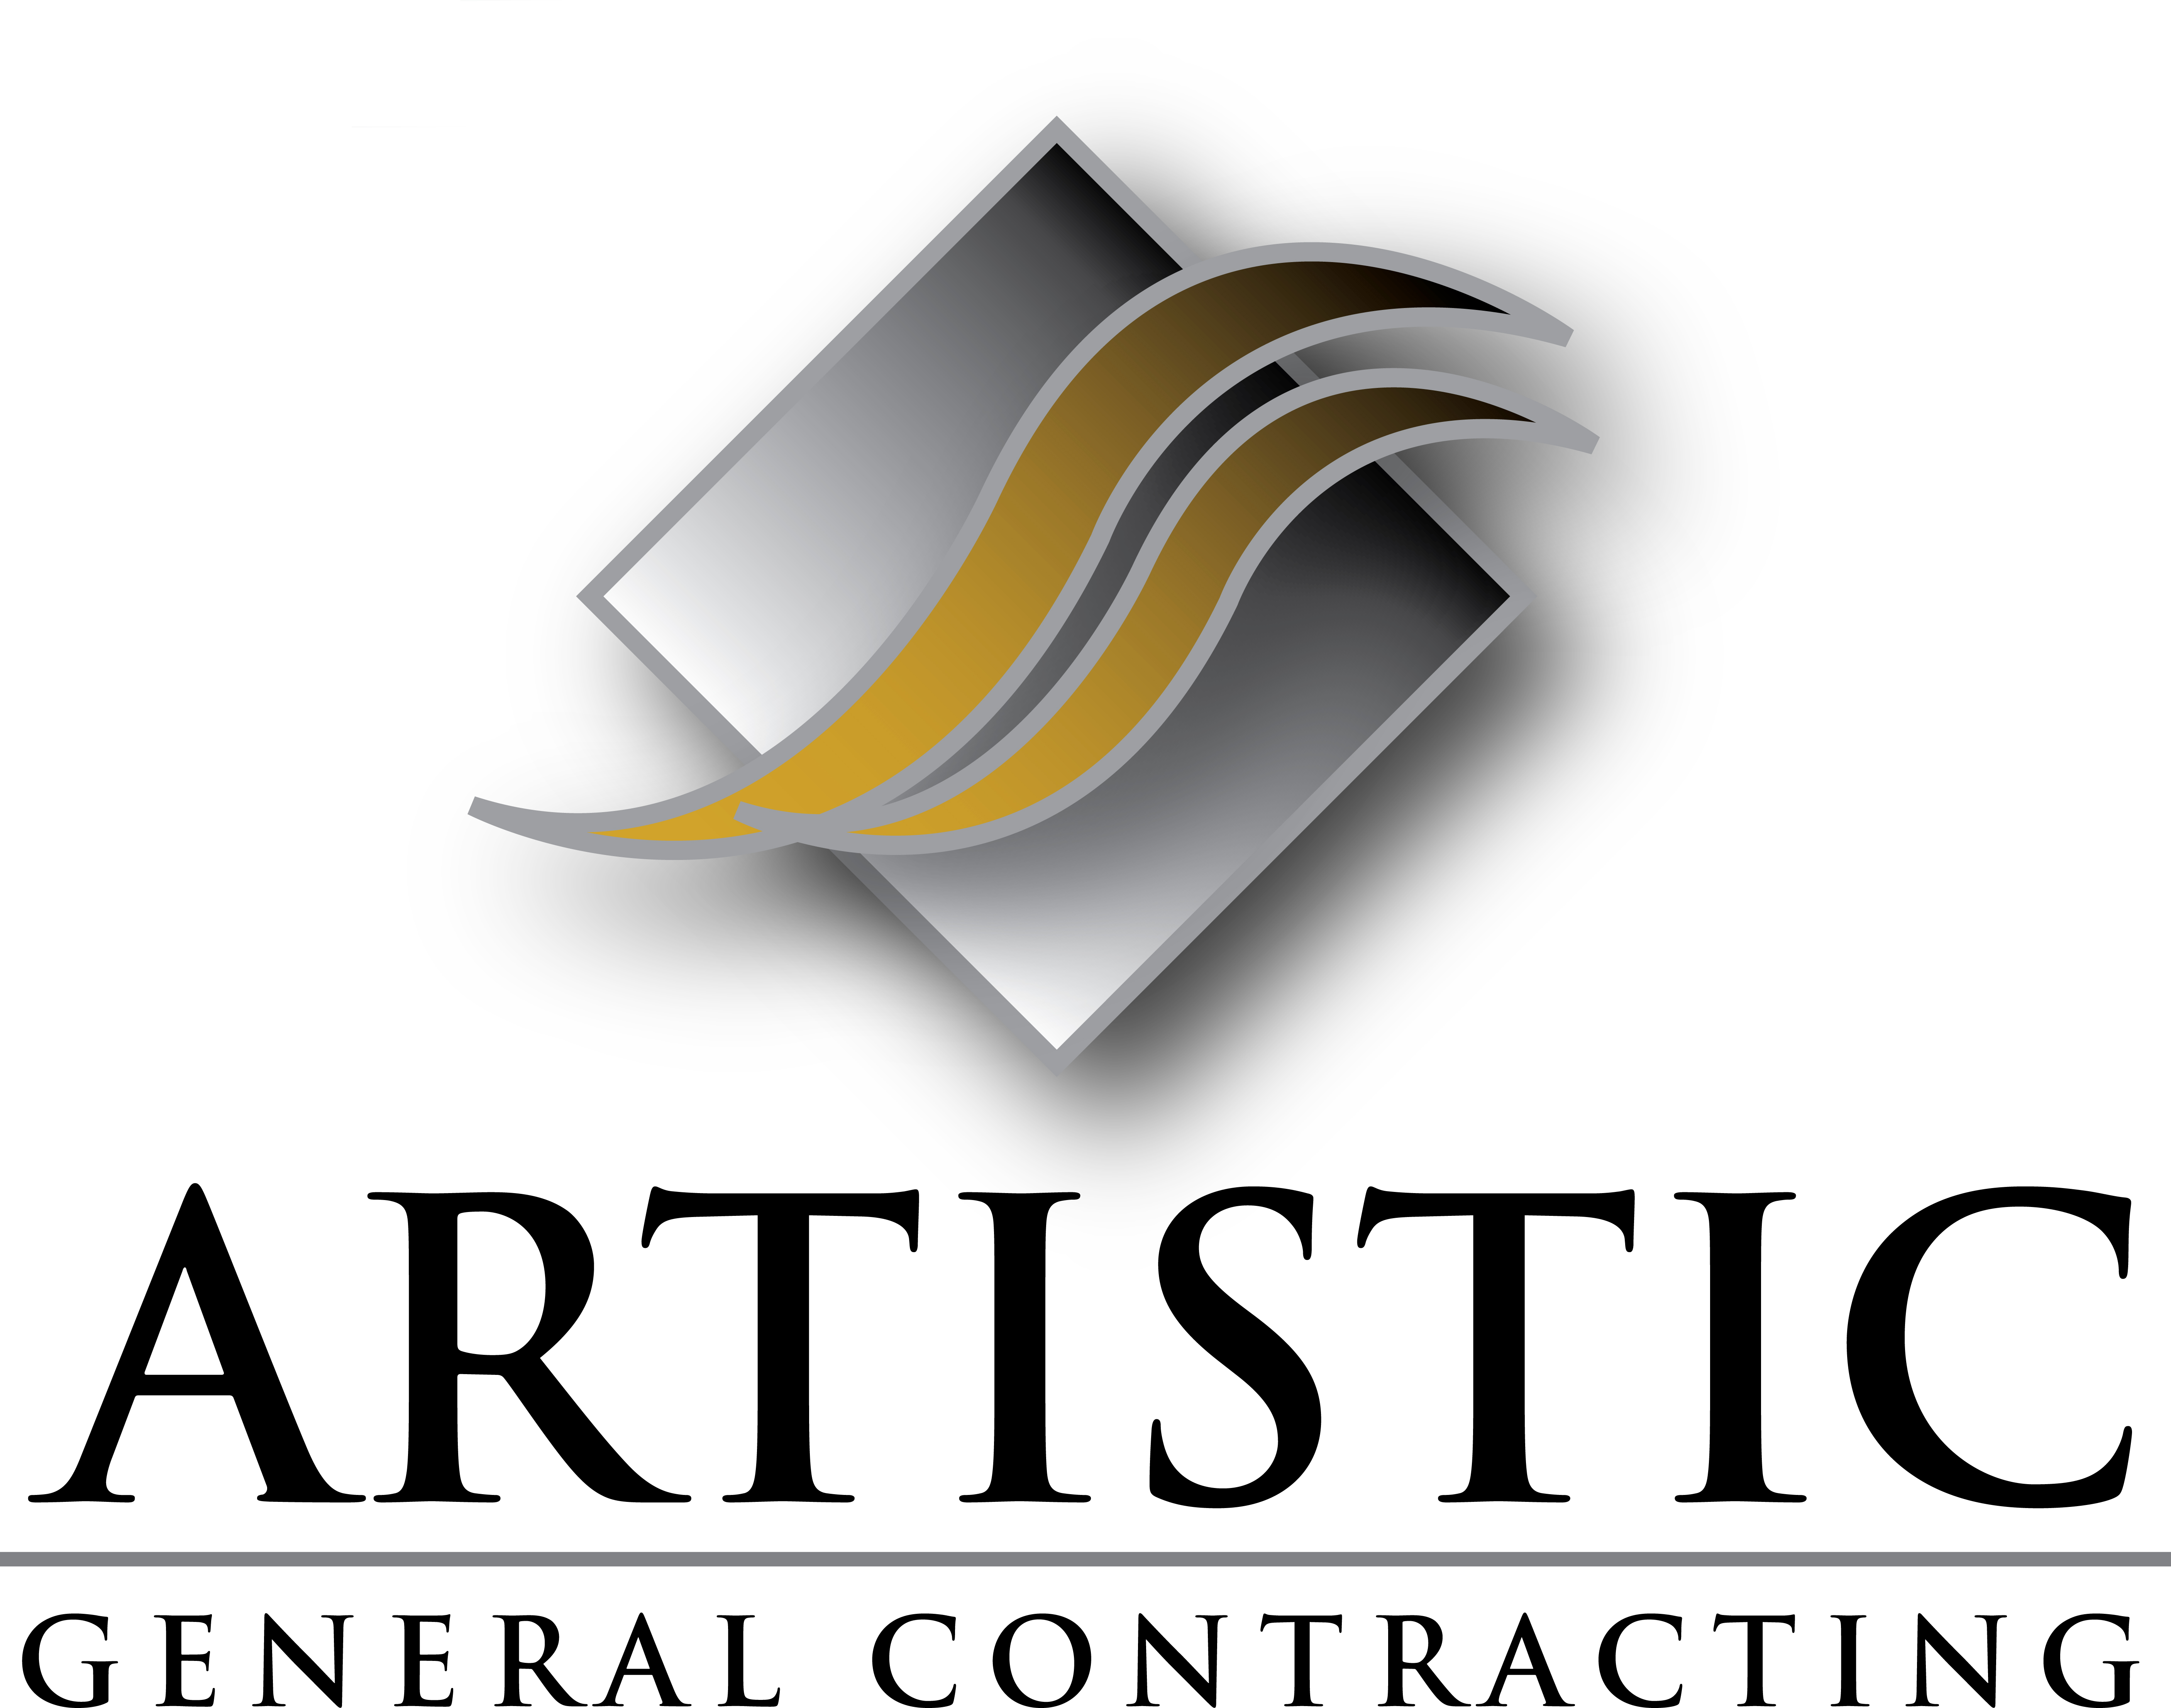 Artistic General Contracting